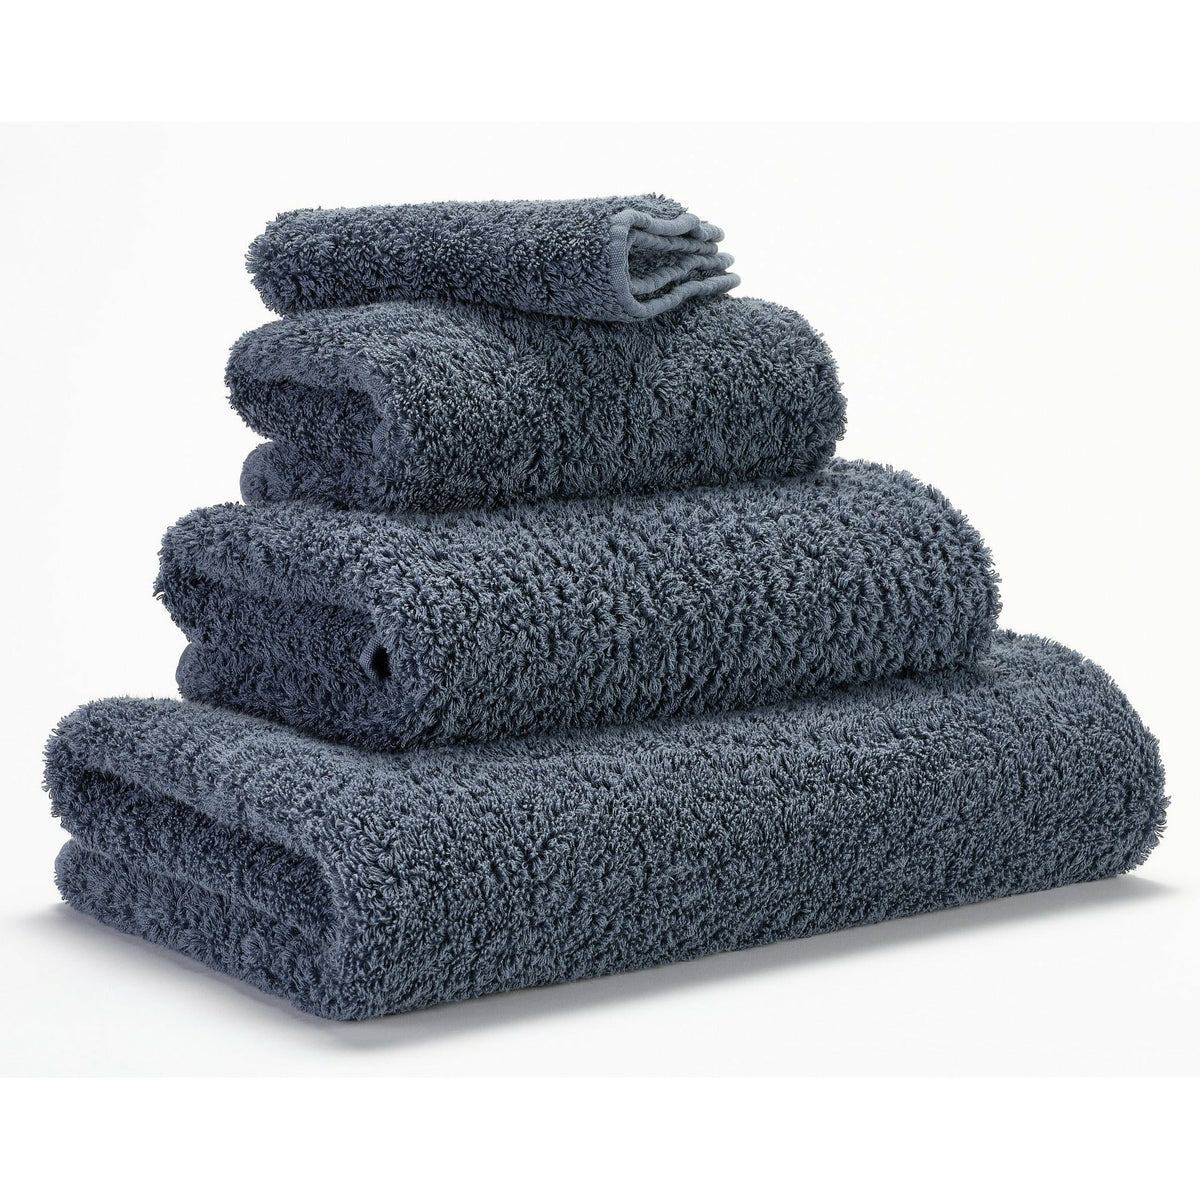 Buy Navy Blue Towels & Bath Robes for Home & Kitchen by BIANCA Online |  Ajio.com